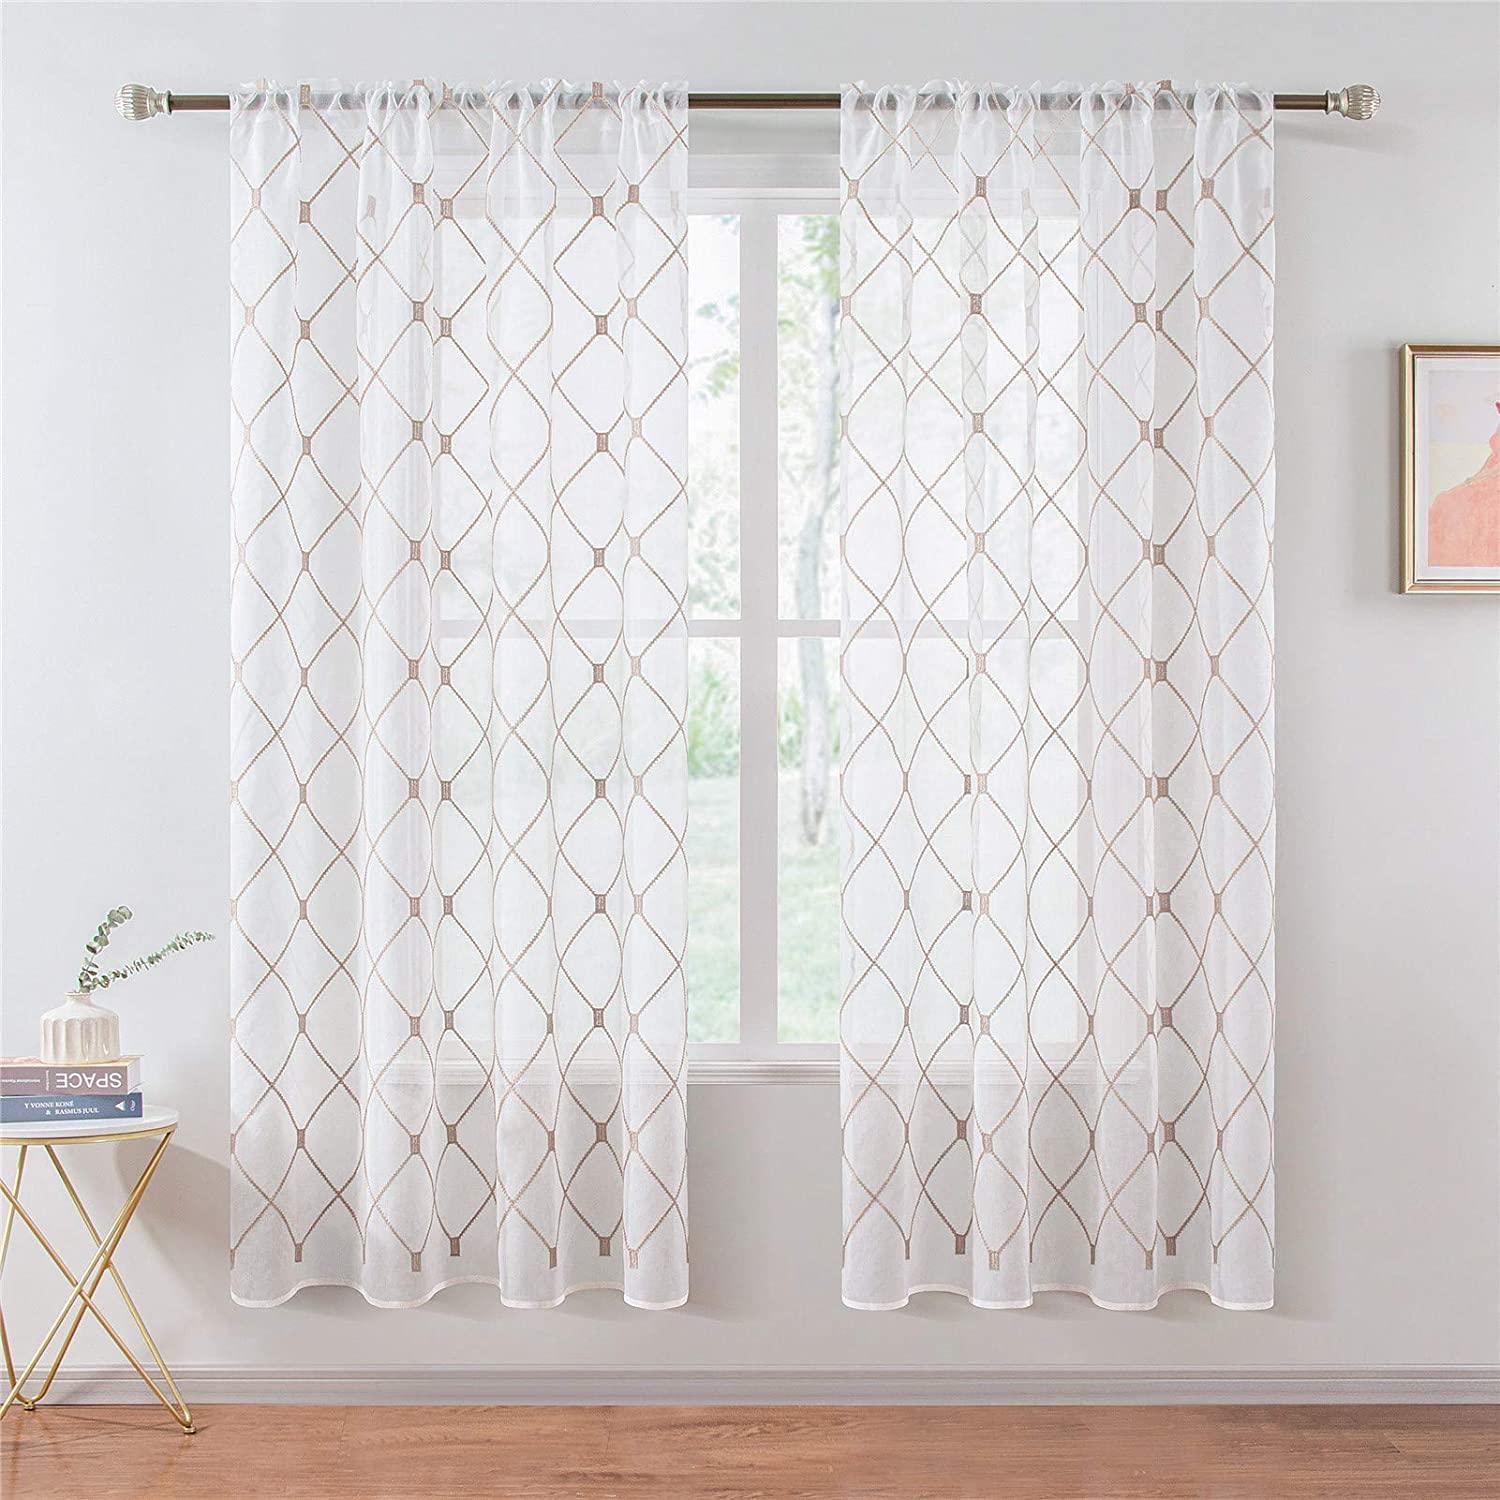 Custom Your Own Curtains - Embroidered White Sheer Curtain Panels,Geometric Diamond Curtains Recommendation For Nursery,Kitchen,1 Panel - Topfinel